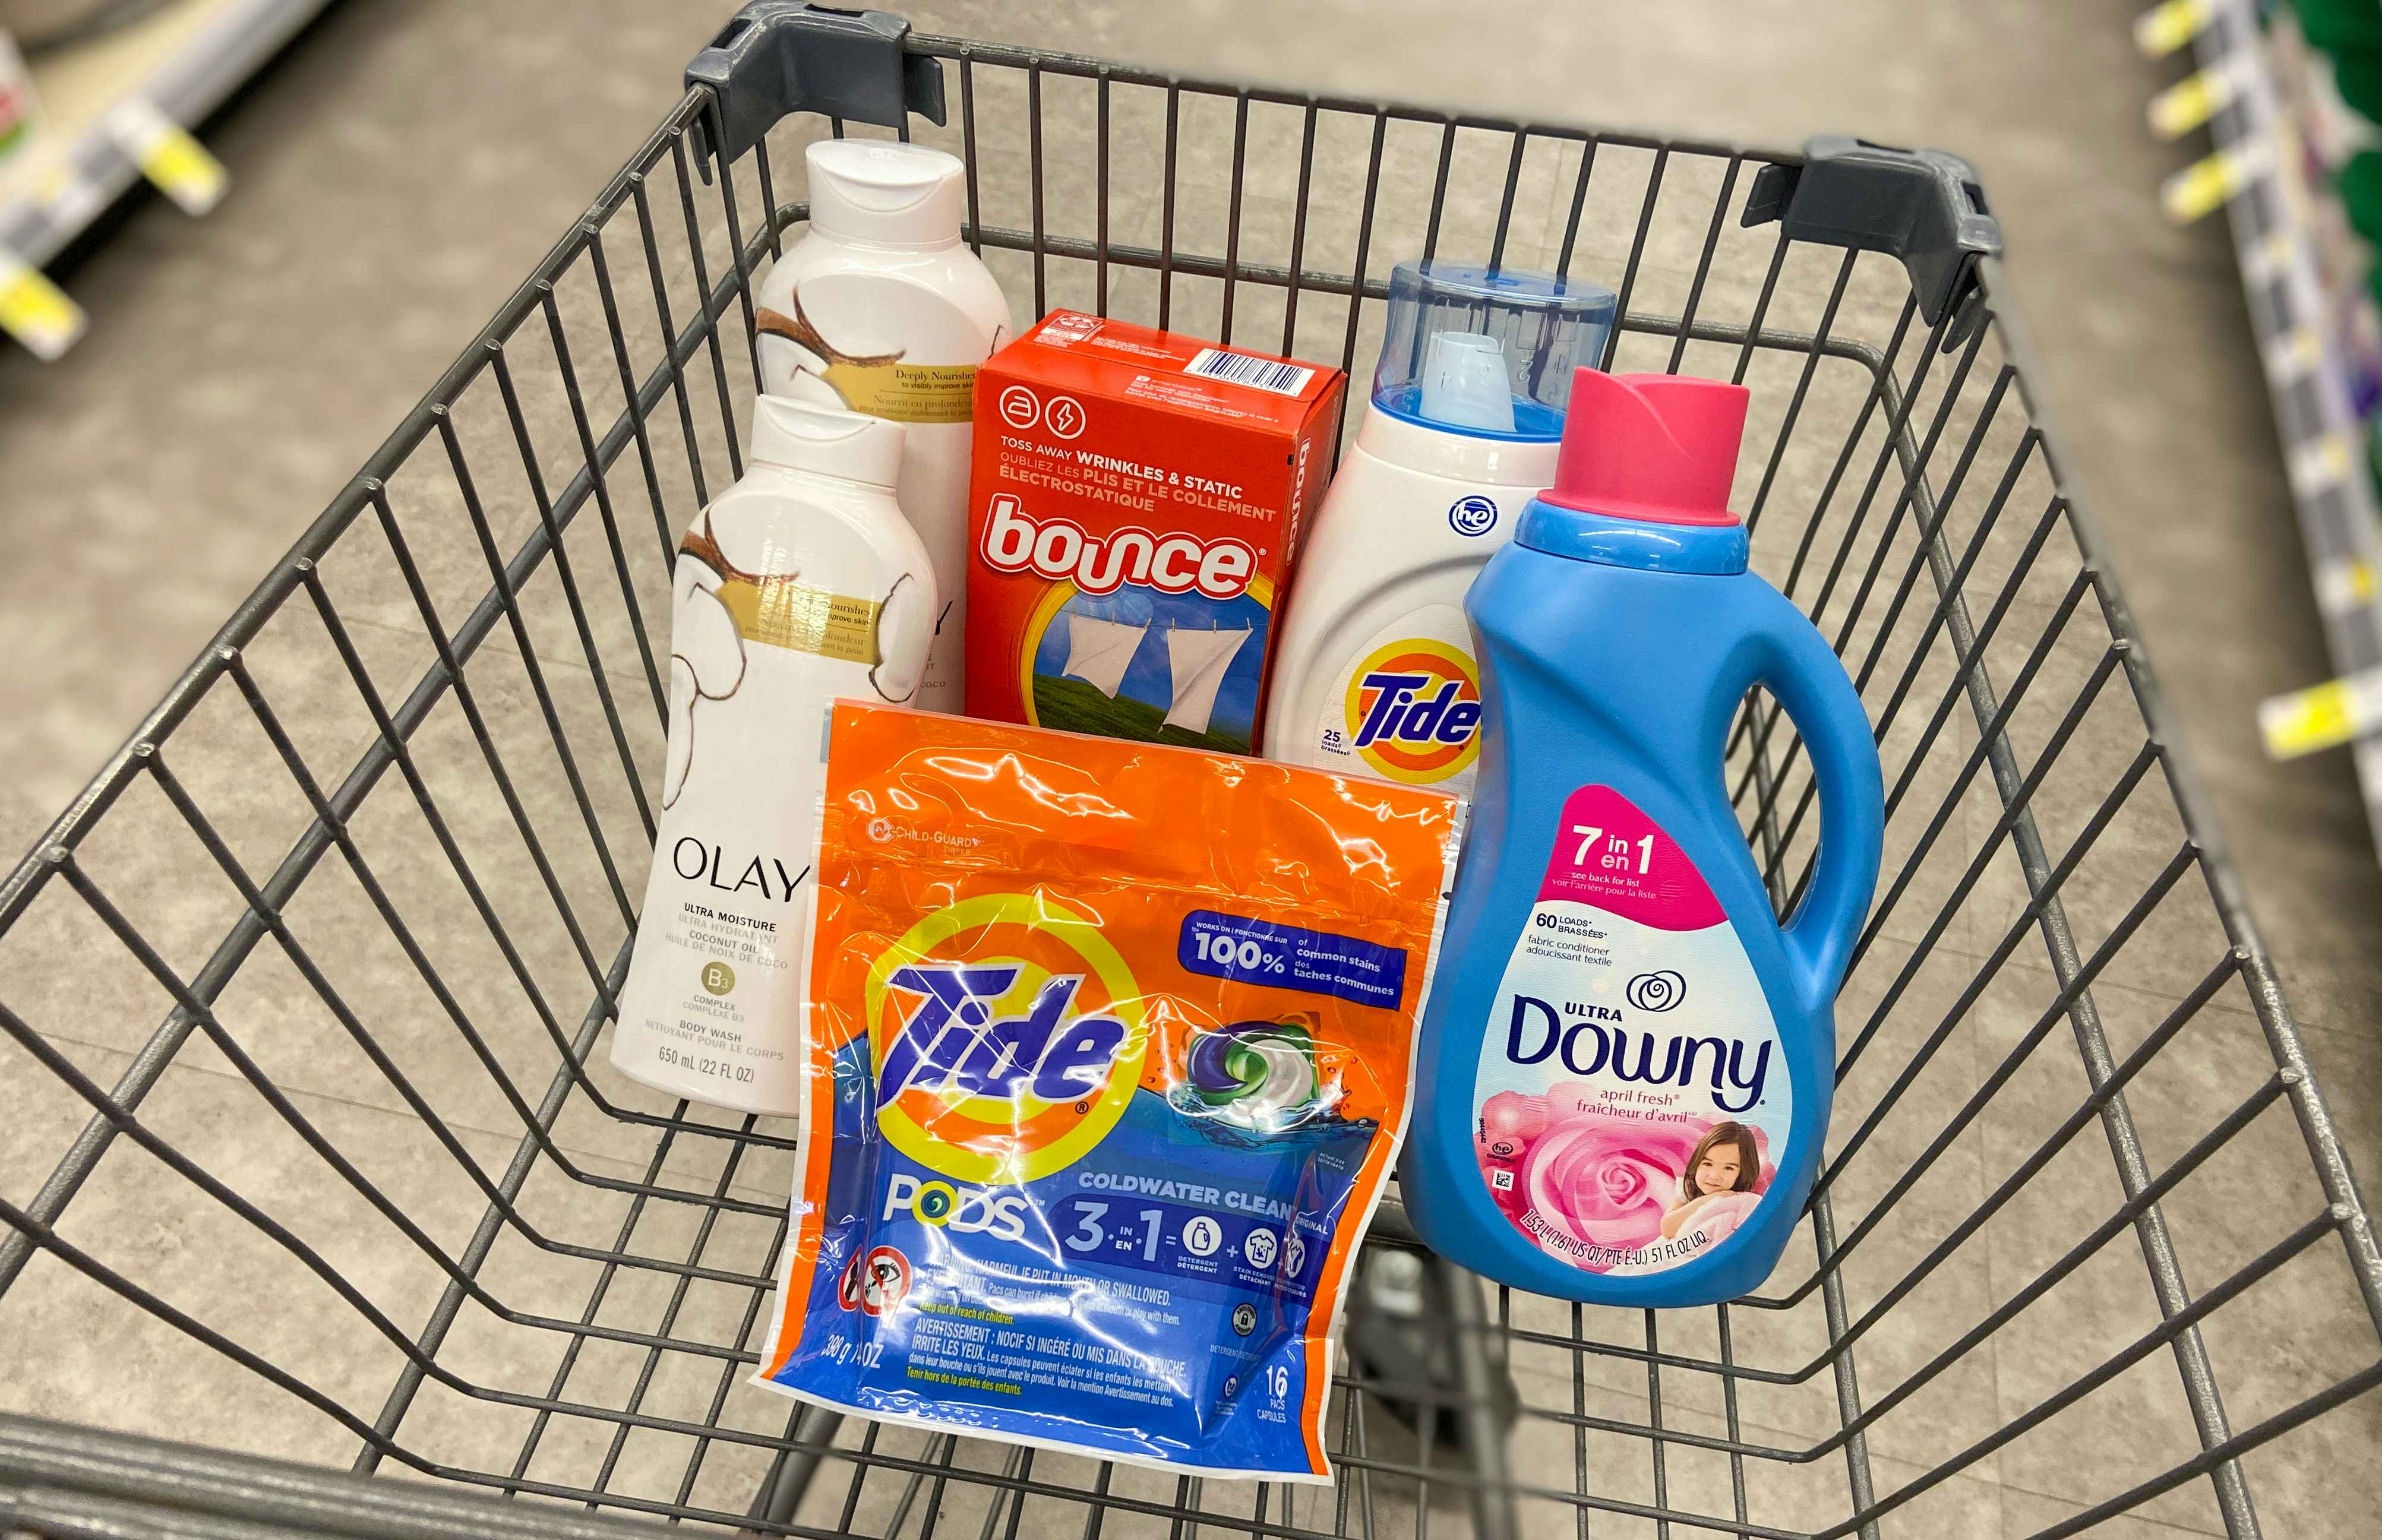 walgreens cart with tide, olay, bounce, and downy